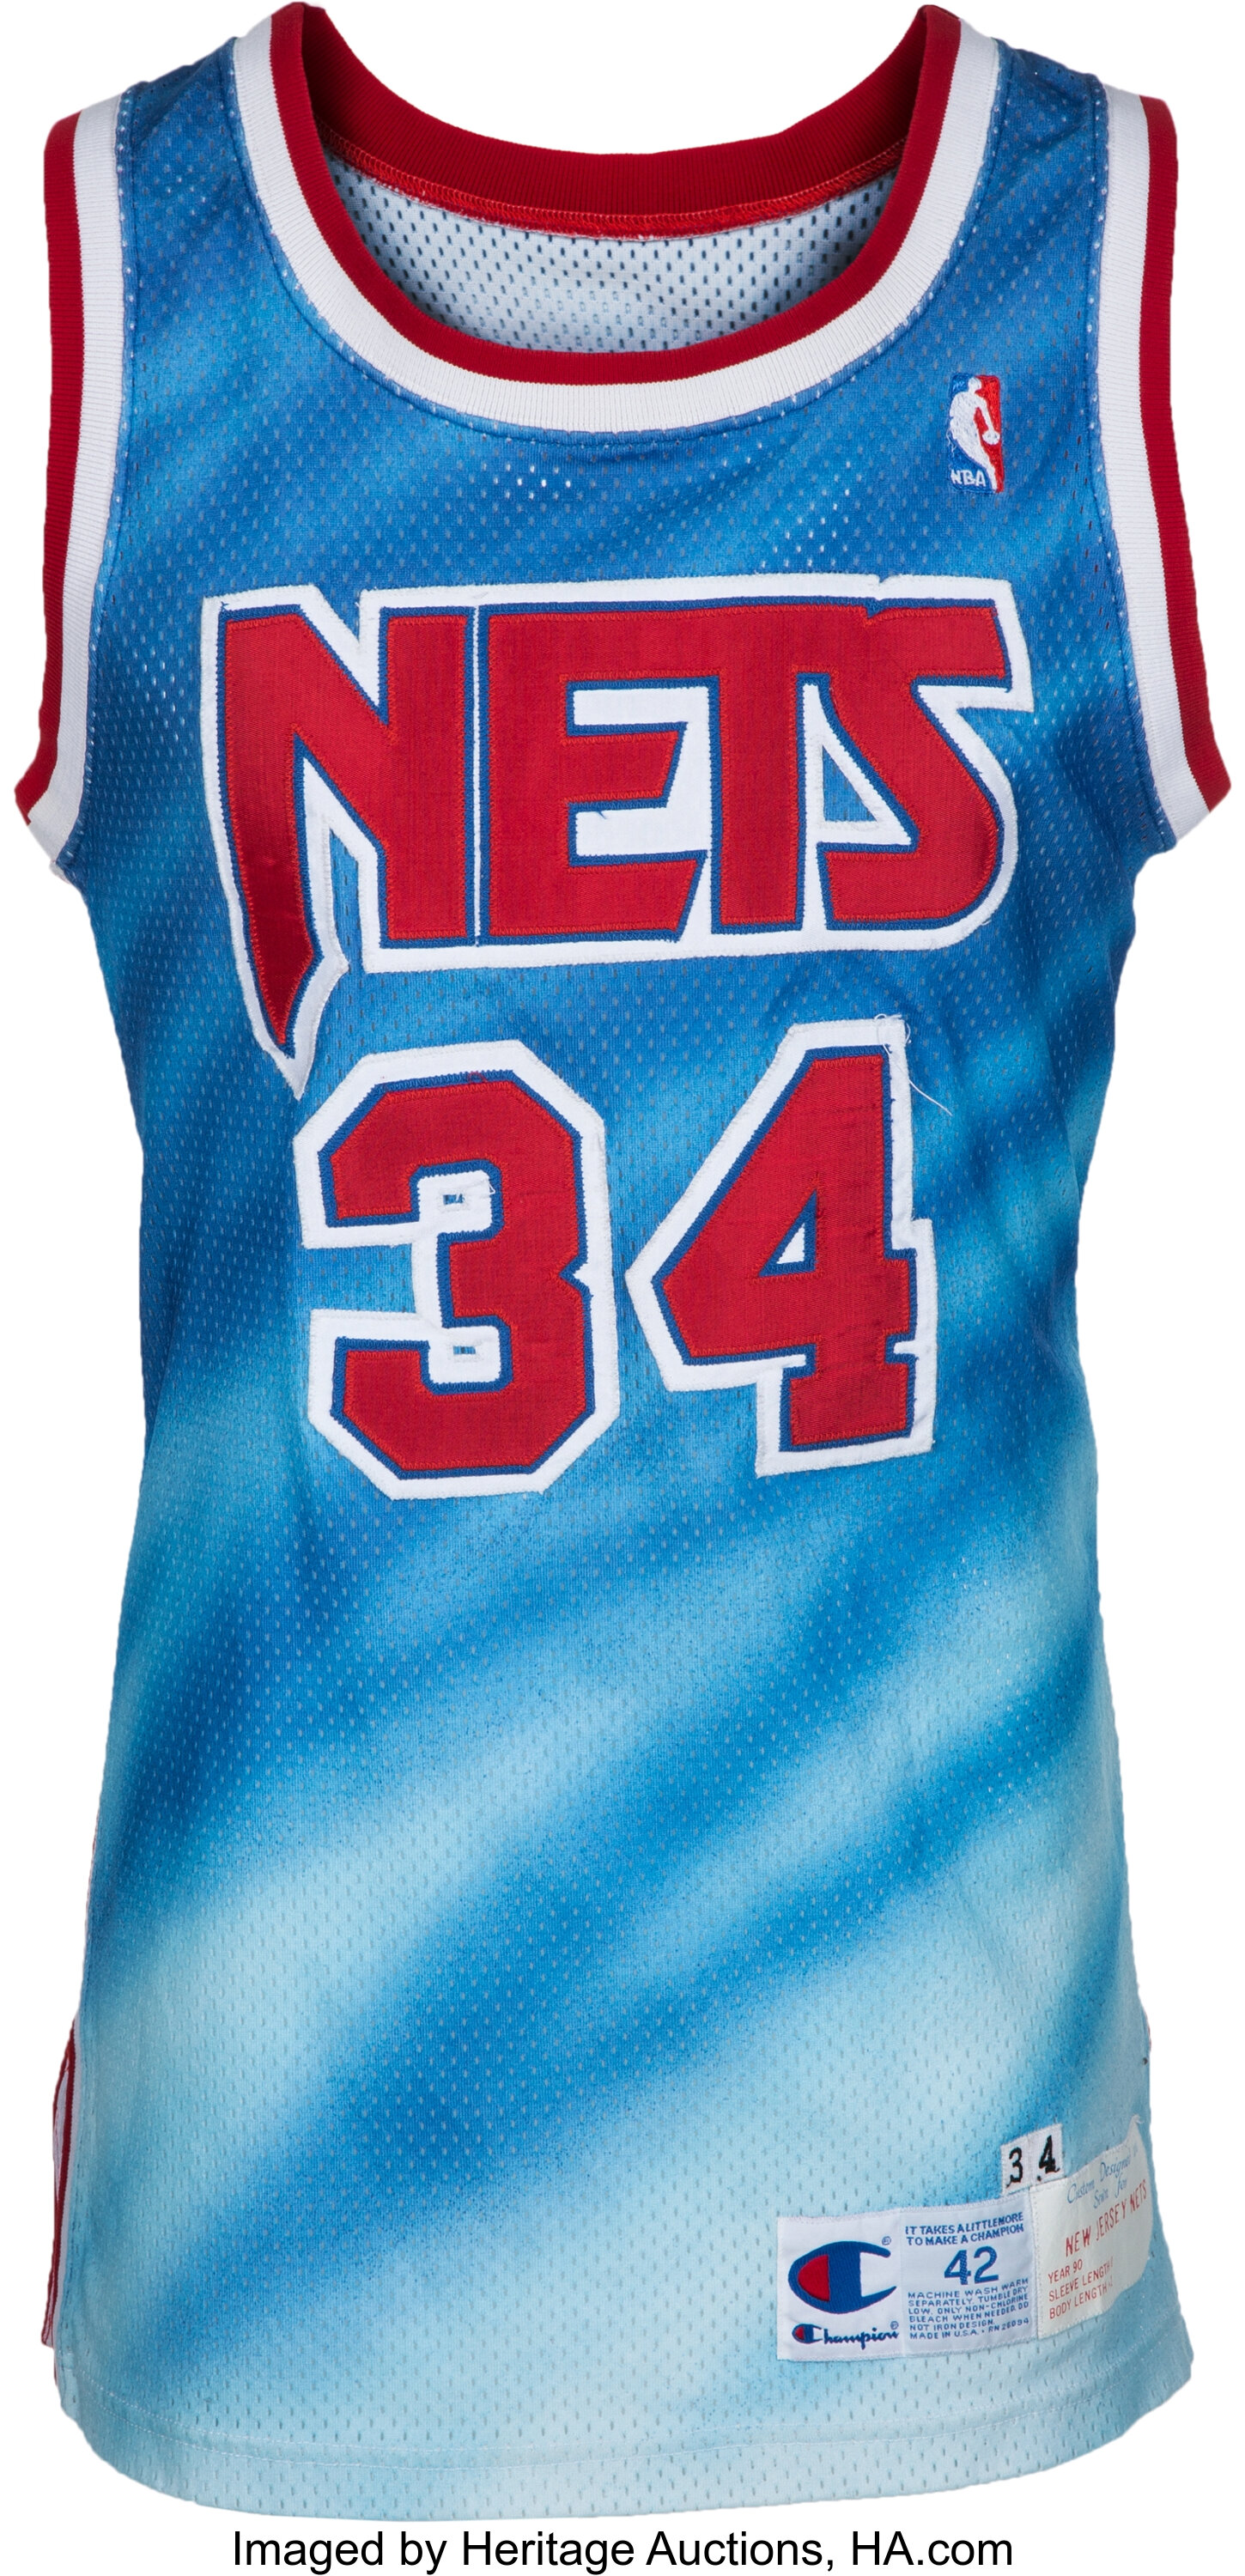 Nets 'City Edition' uniforms pay tribute to New Jersey roots - NetsDaily